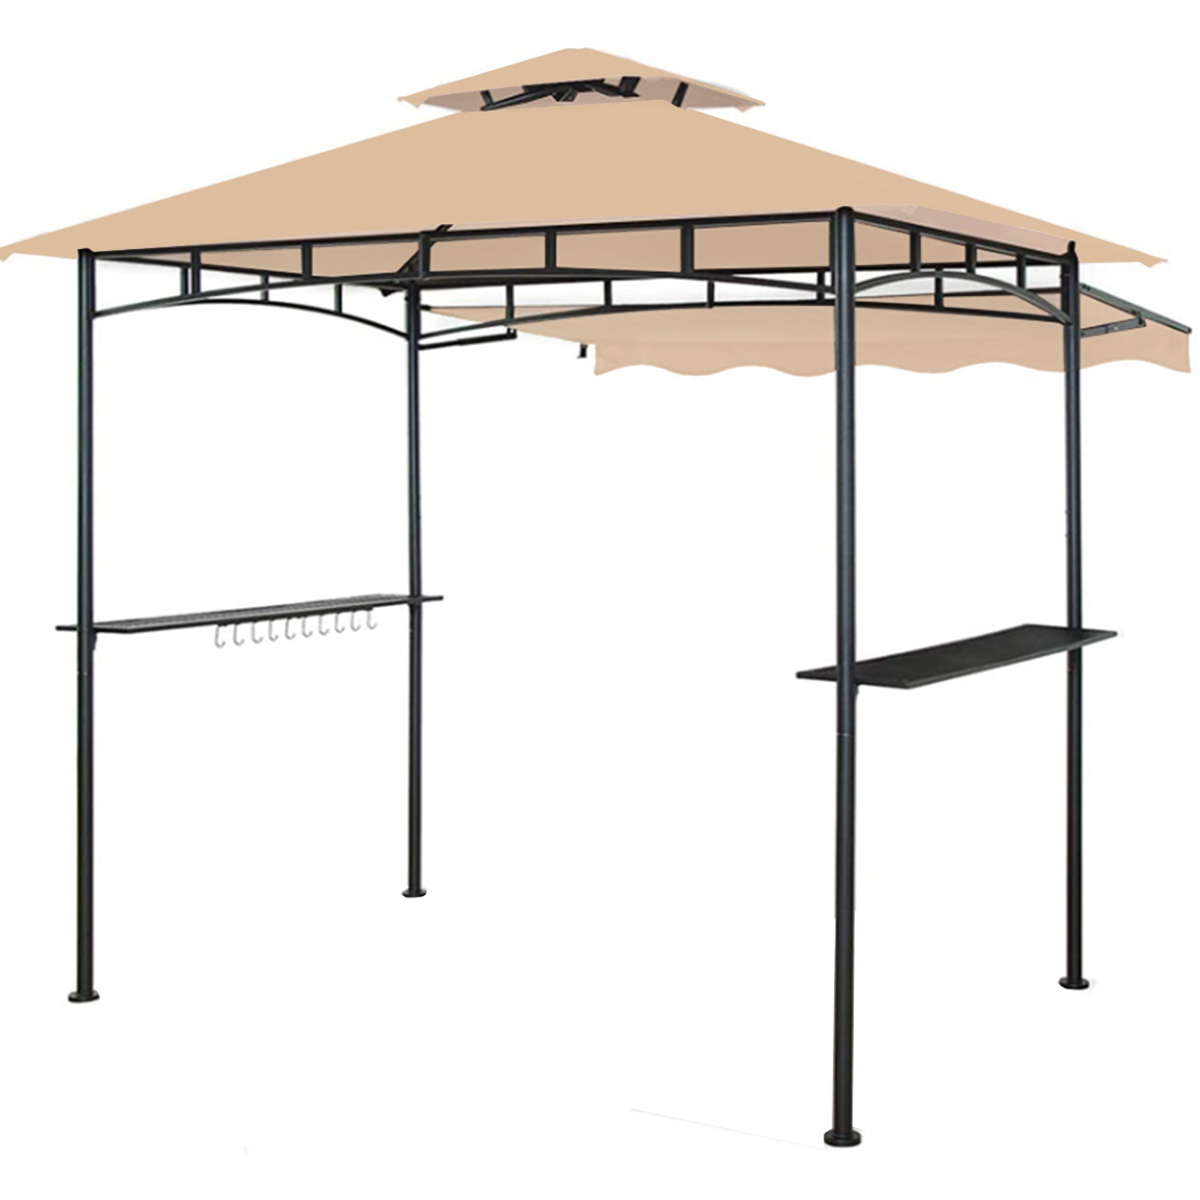 Replacement Canopy for Charmeleon 2 Tiered 8 x 8 Grill Gazebo -